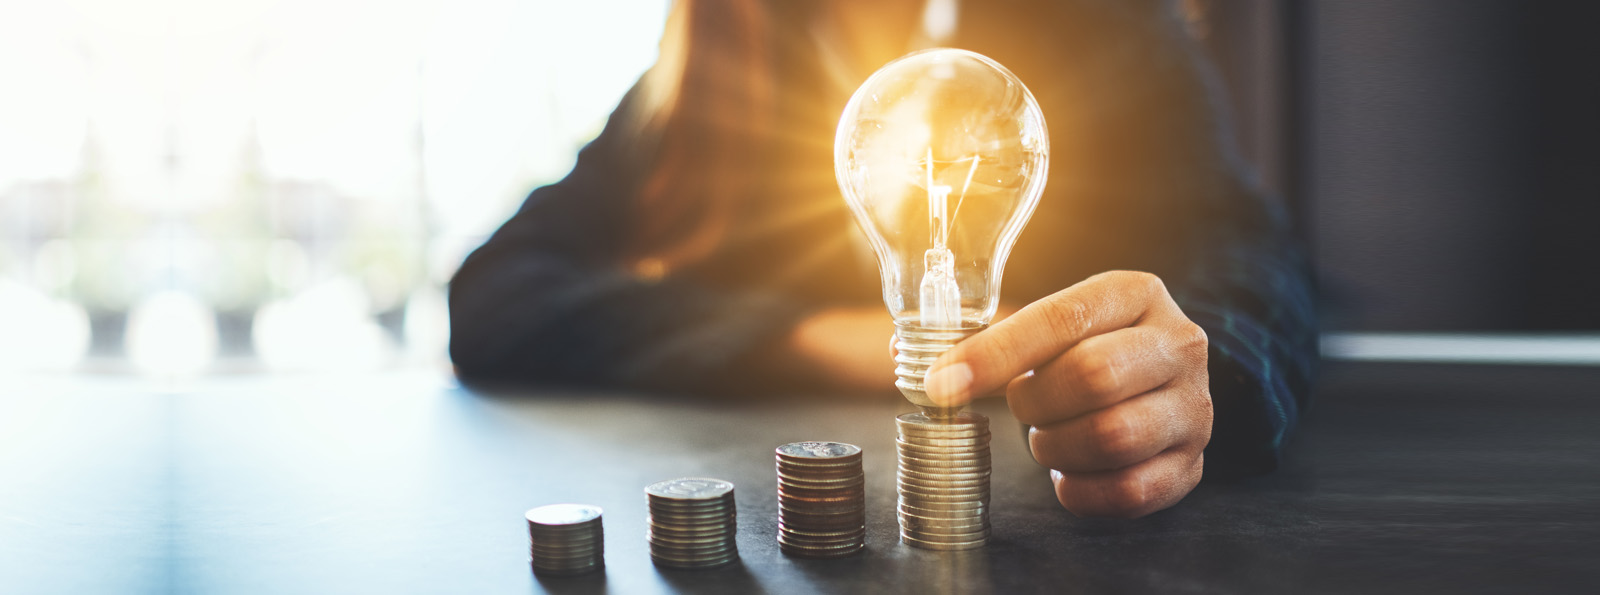 business person holding lit lightbulb over stacks of coins